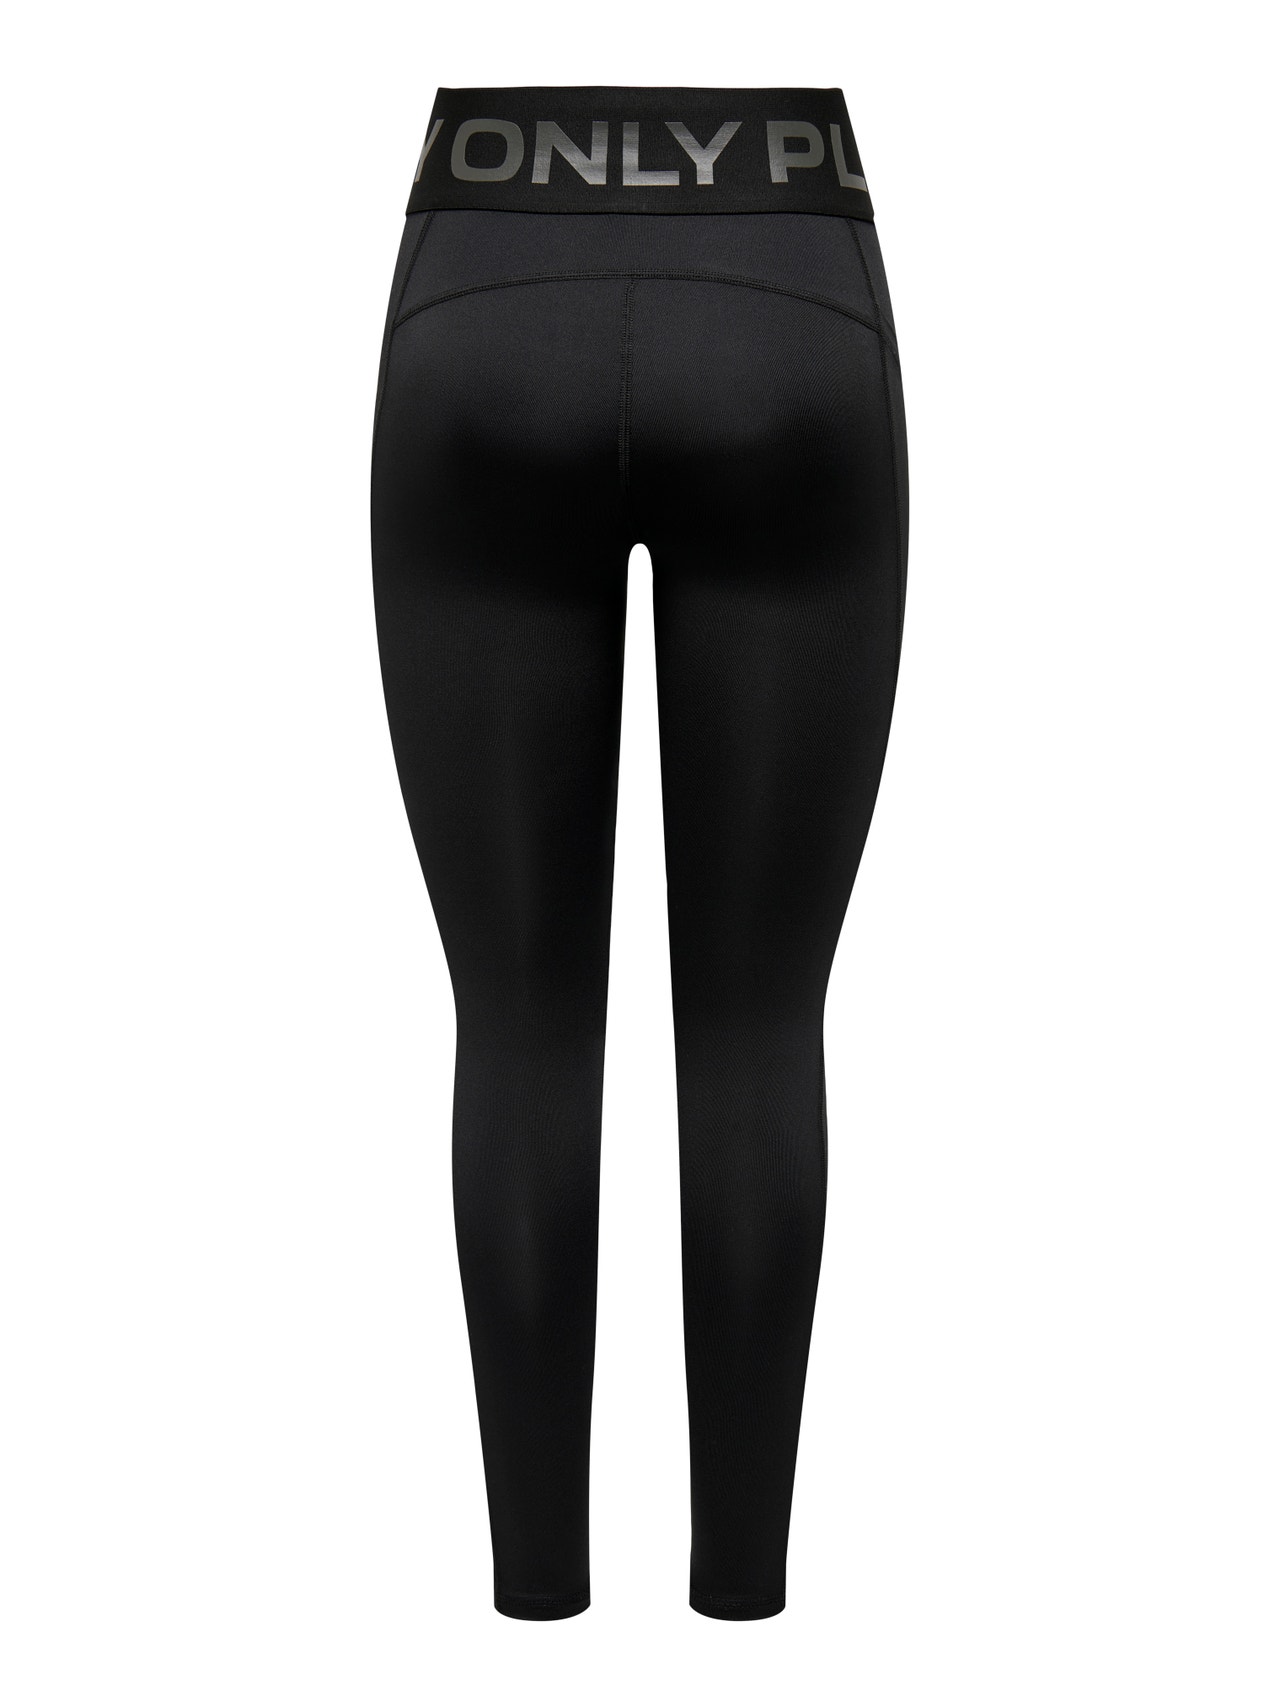 ONLY Tight Fit High waist Leggings -Black - 15295194